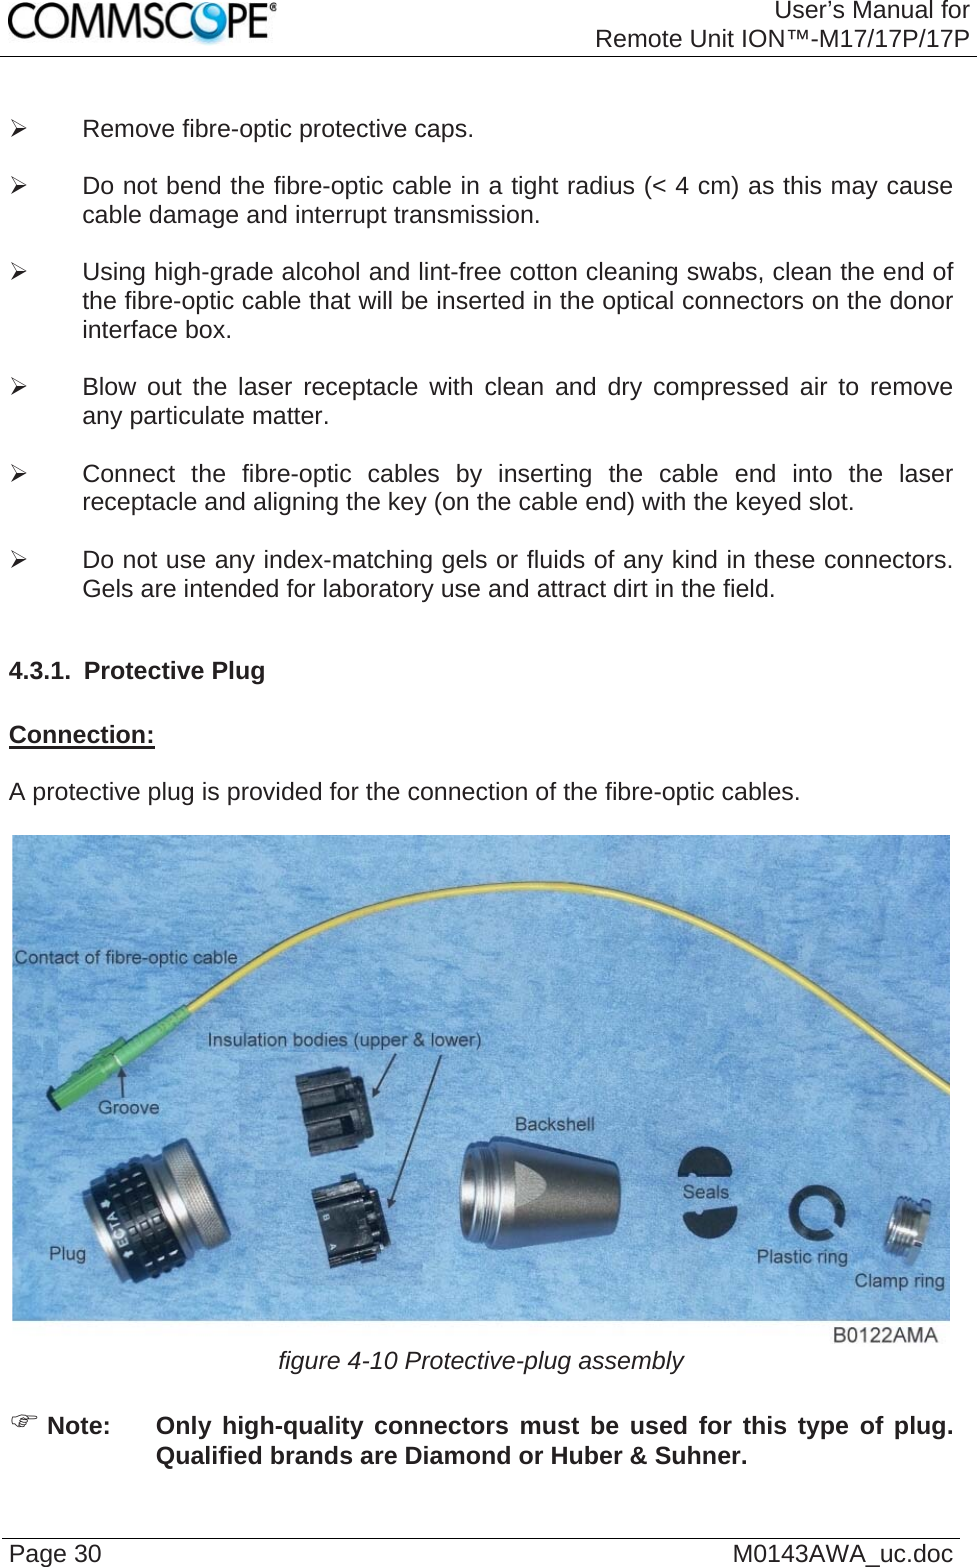 User’s Manual forRemote Unit ION™-M17/17P/17P Page 30  M0143AWA_uc.doc ¾  Remove fibre-optic protective caps.  ¾  Do not bend the fibre-optic cable in a tight radius (&lt; 4 cm) as this may cause cable damage and interrupt transmission.  ¾  Using high-grade alcohol and lint-free cotton cleaning swabs, clean the end of the fibre-optic cable that will be inserted in the optical connectors on the donor interface box.  ¾  Blow out the laser receptacle with clean and dry compressed air to remove any particulate matter.  ¾  Connect the fibre-optic cables by inserting the cable end into the laser receptacle and aligning the key (on the cable end) with the keyed slot.  ¾  Do not use any index-matching gels or fluids of any kind in these connectors. Gels are intended for laboratory use and attract dirt in the field.  4.3.1.  Protective Plug  Connection:  A protective plug is provided for the connection of the fibre-optic cables.   figure 4-10 Protective-plug assembly  ) Note:  Only high-quality connectors must be used for this type of plug. Qualified brands are Diamond or Huber &amp; Suhner.  